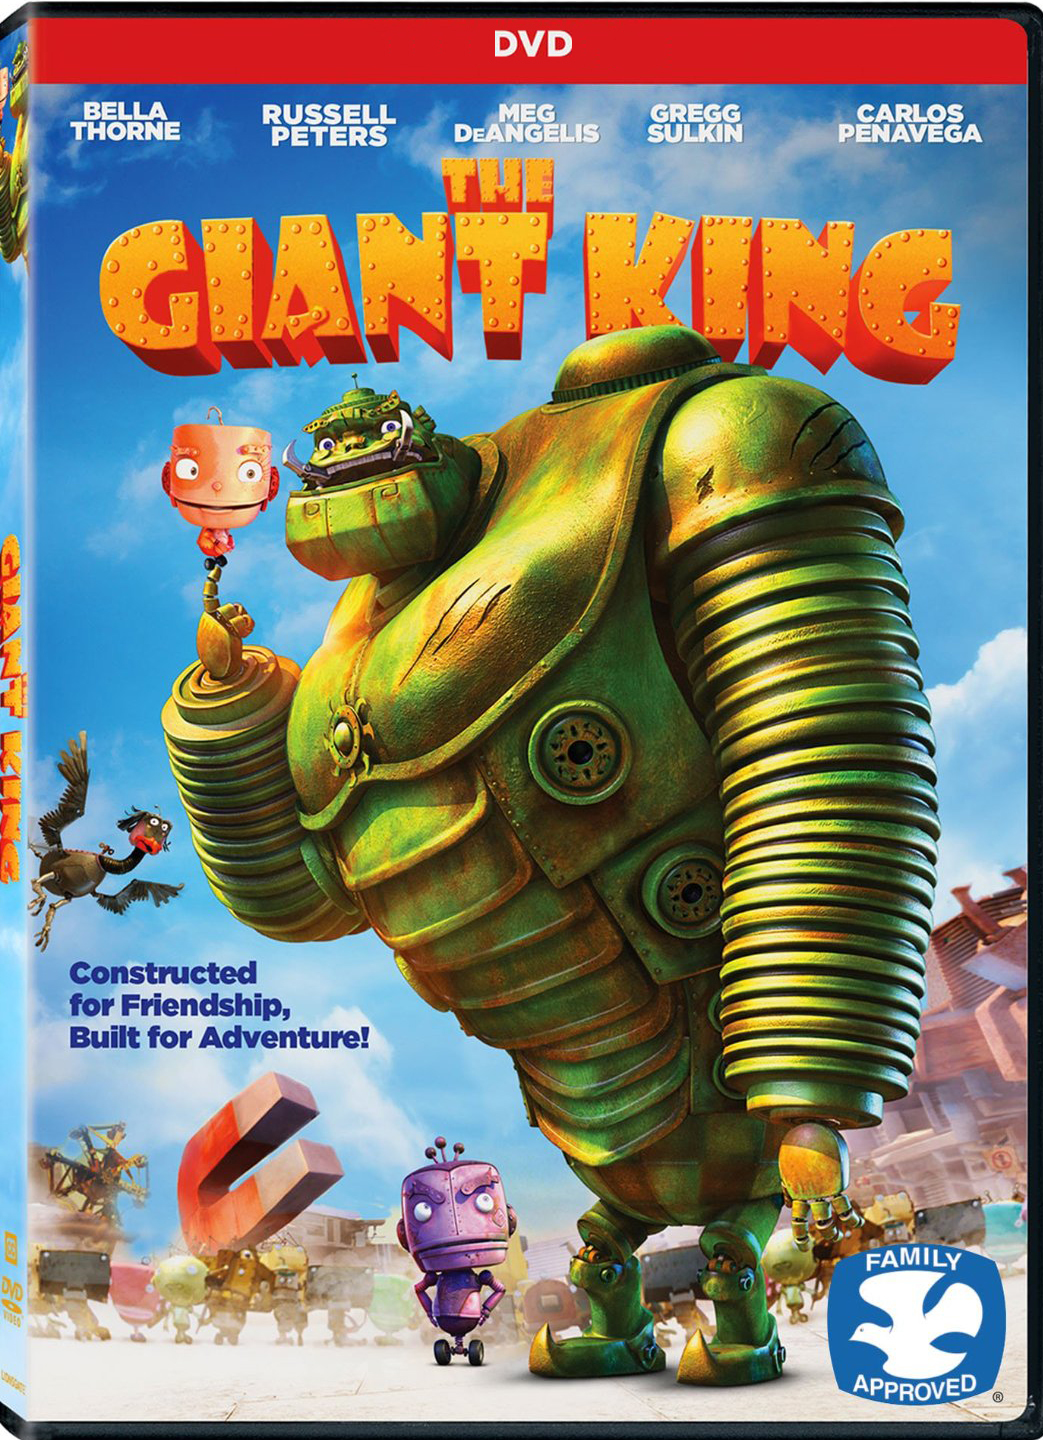 Giant King, The